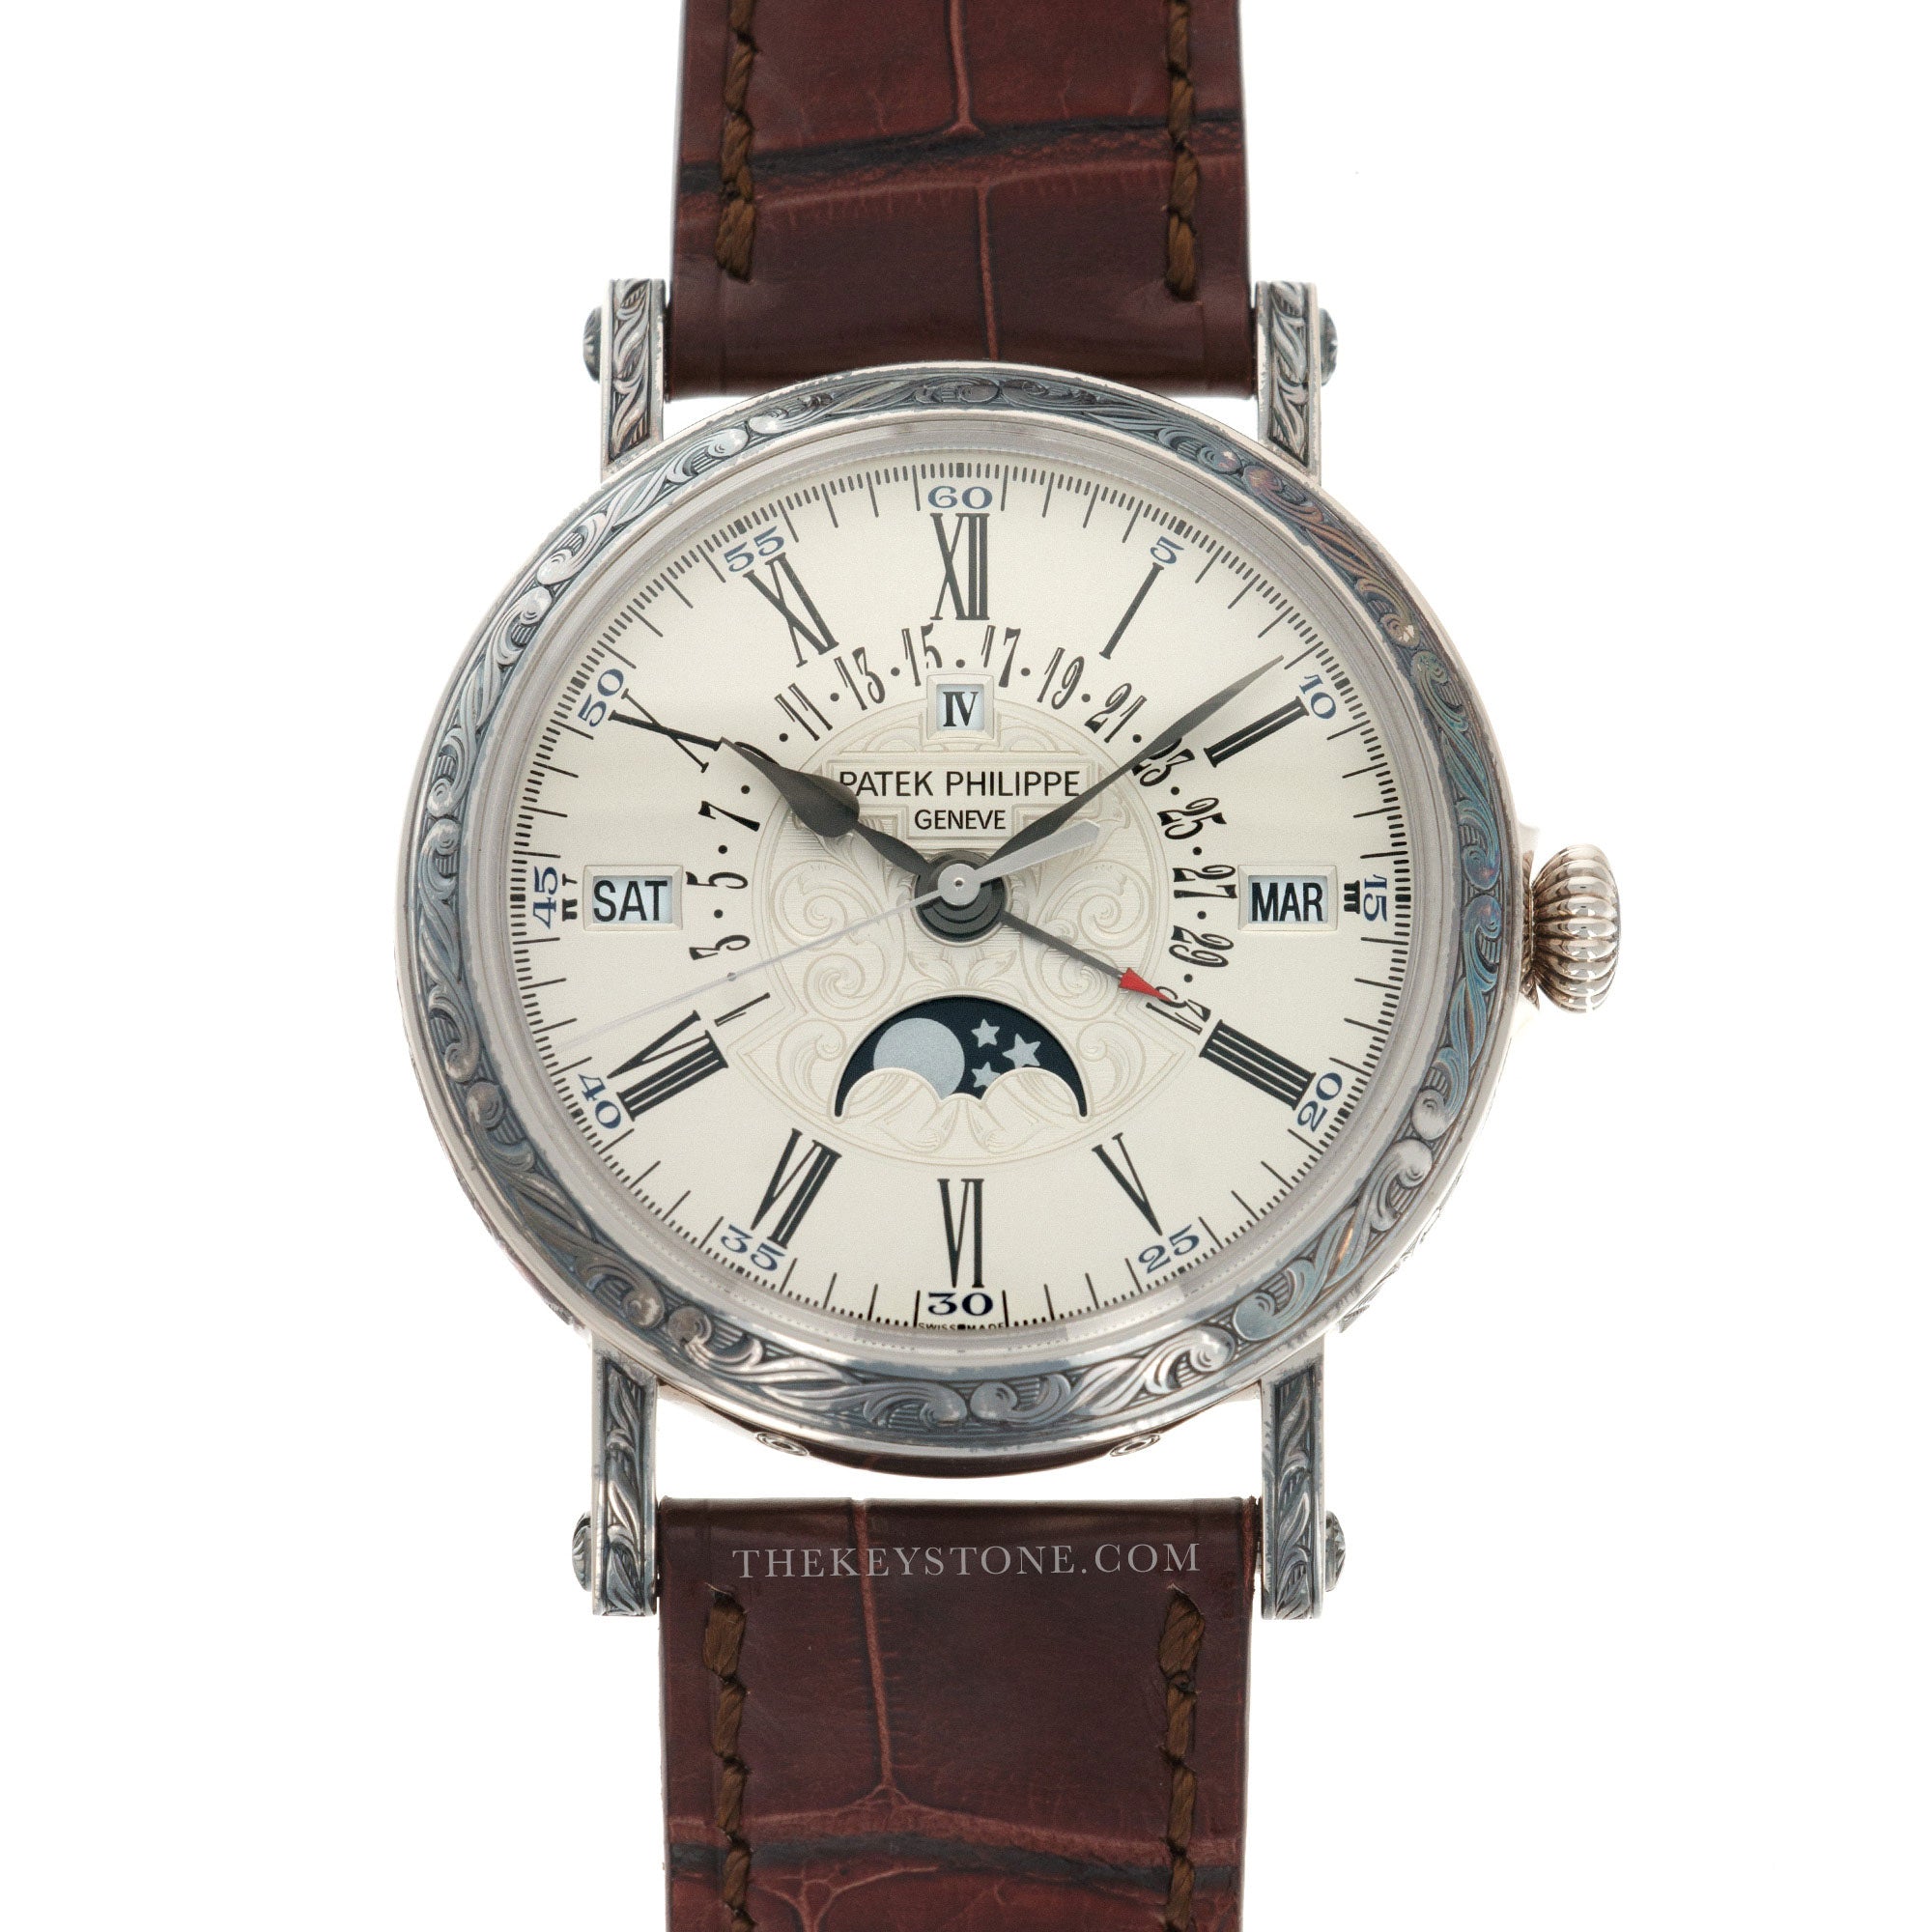 Patek Philippe - Patek Philippe White Gold Perpetual Hand-Engraved Watch Ref. 5160 - The Keystone Watches